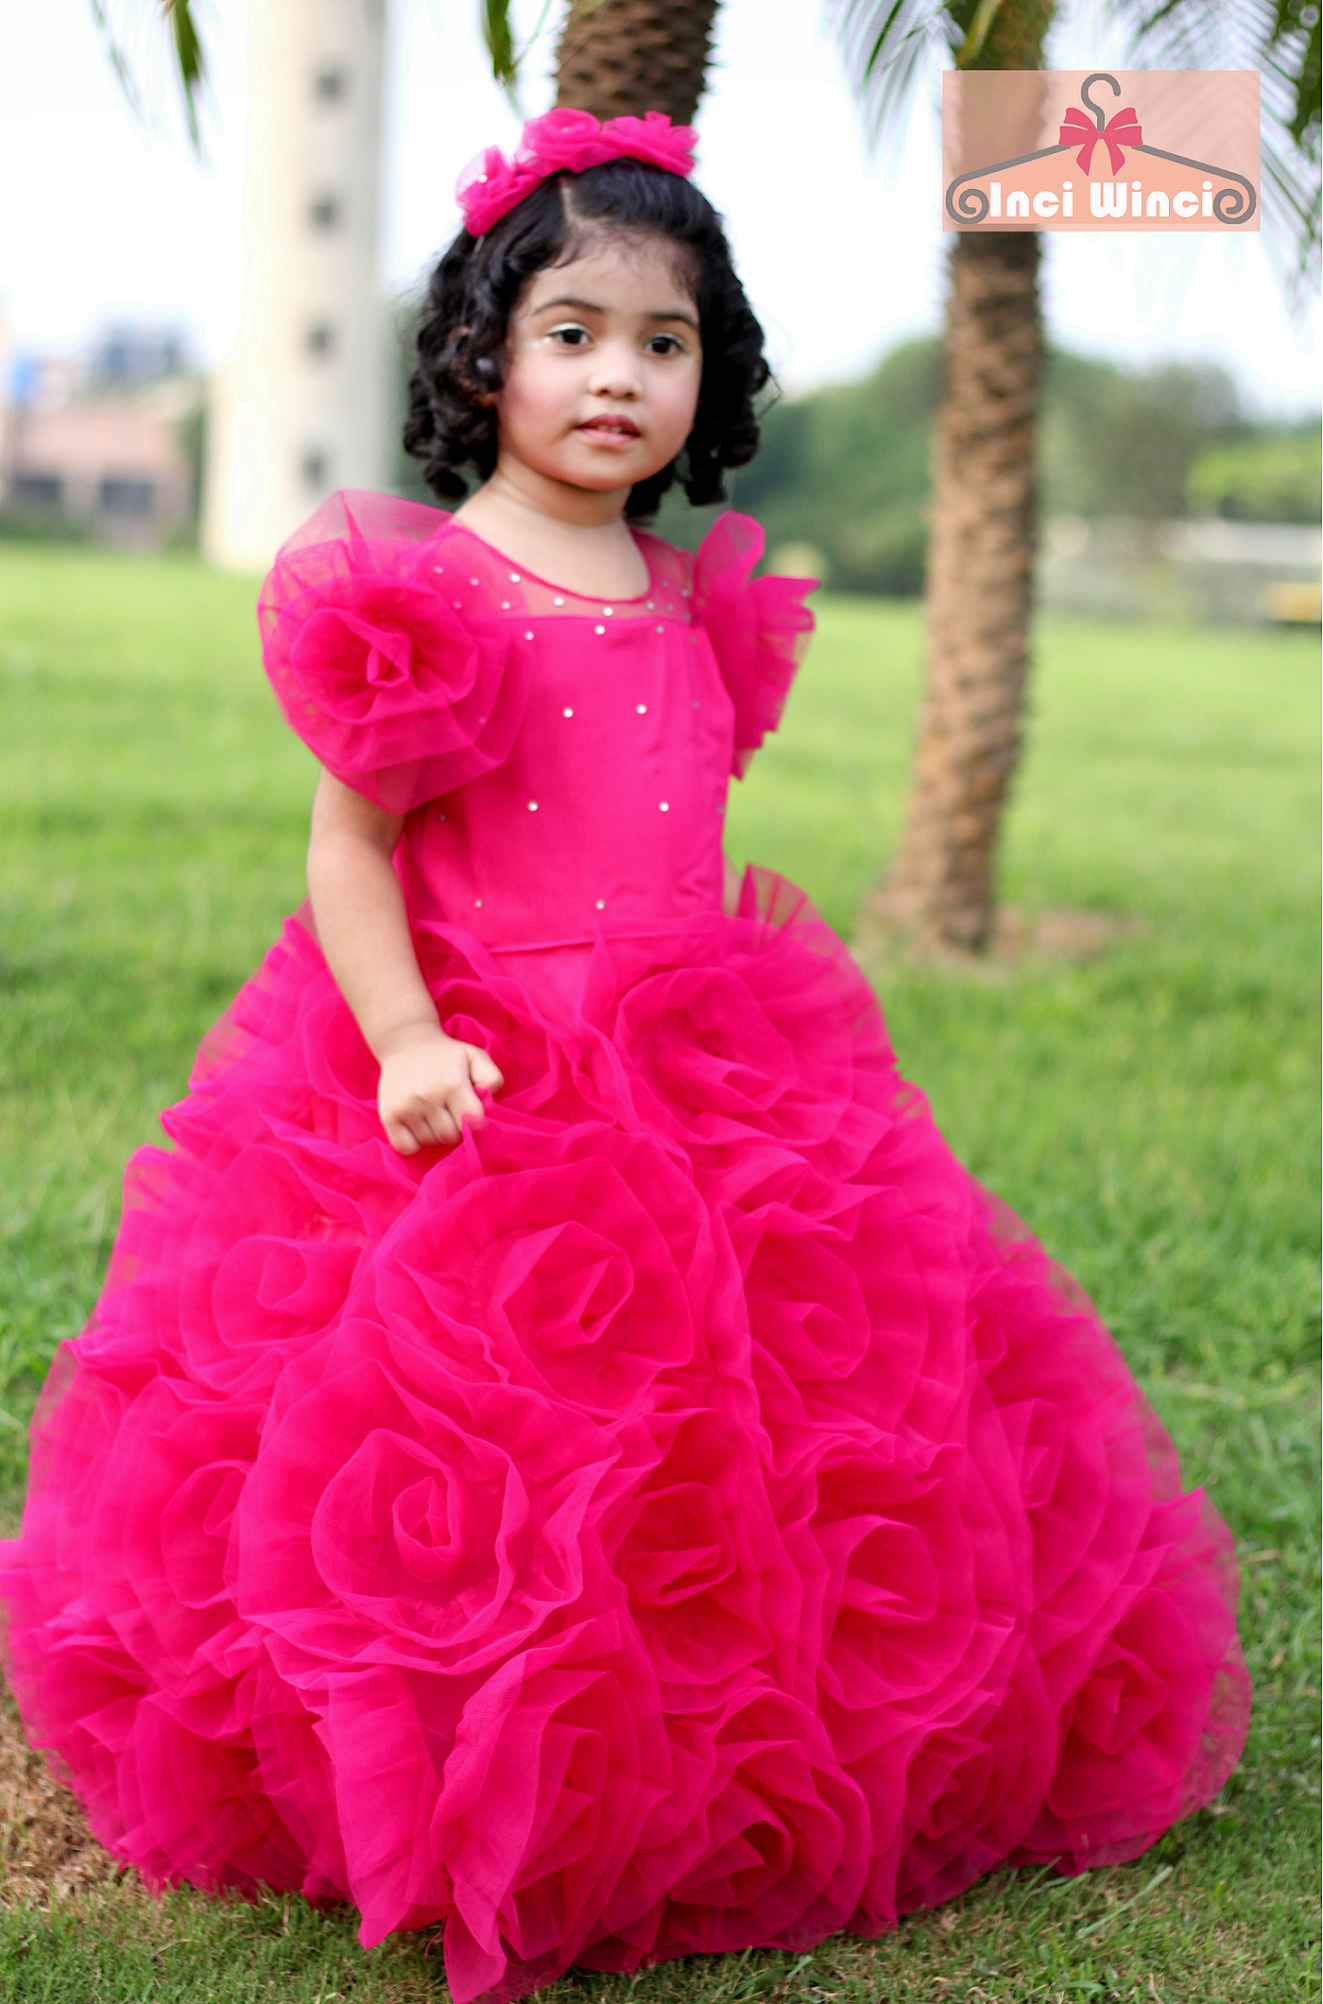 Sleeveless fairy style long white gown for girls